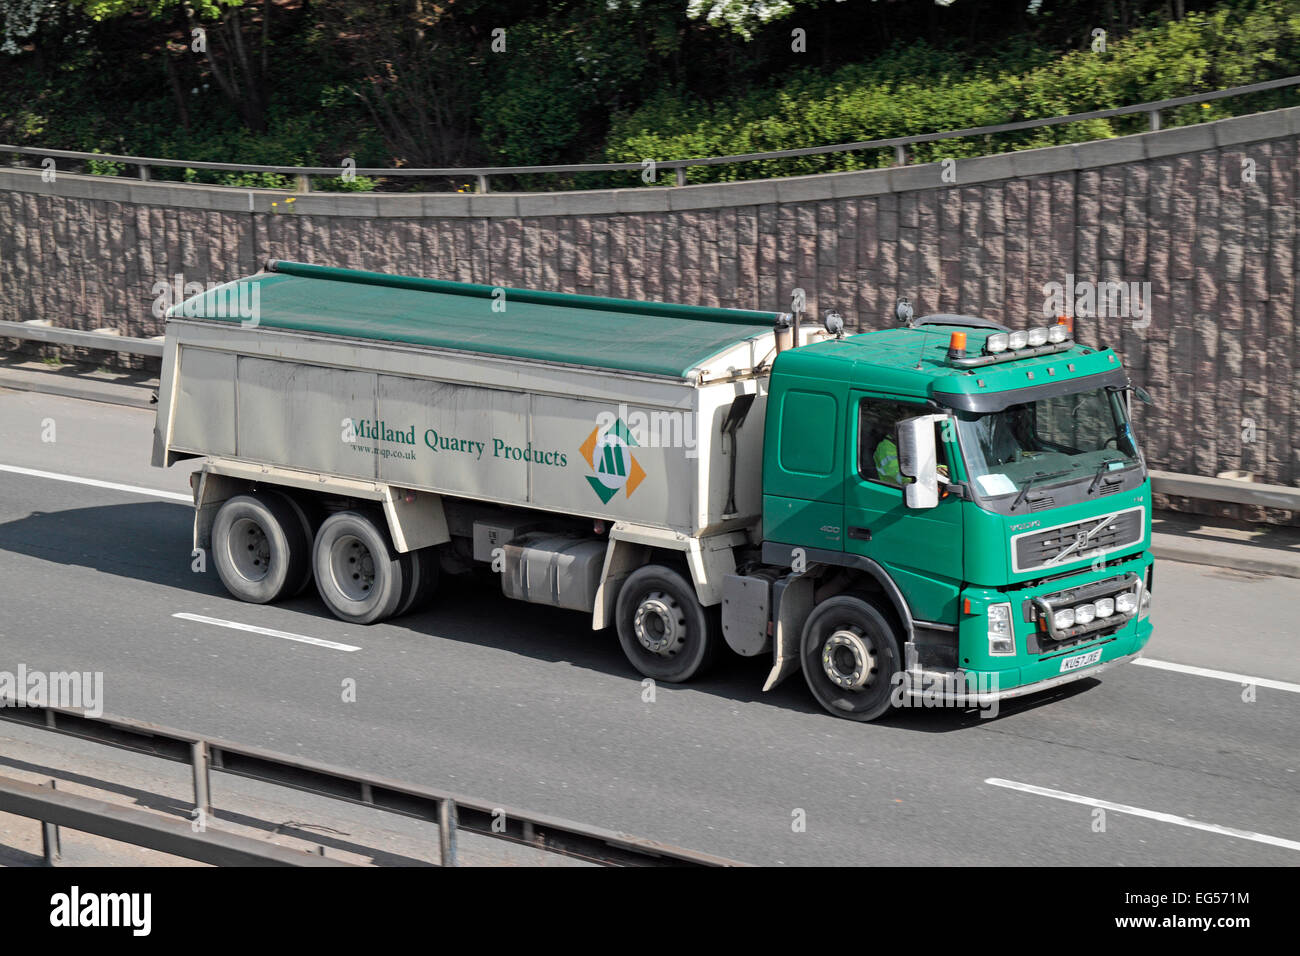 A Midland Quarry Products tipper truck on the A40 in West London, UK. Stock Photo